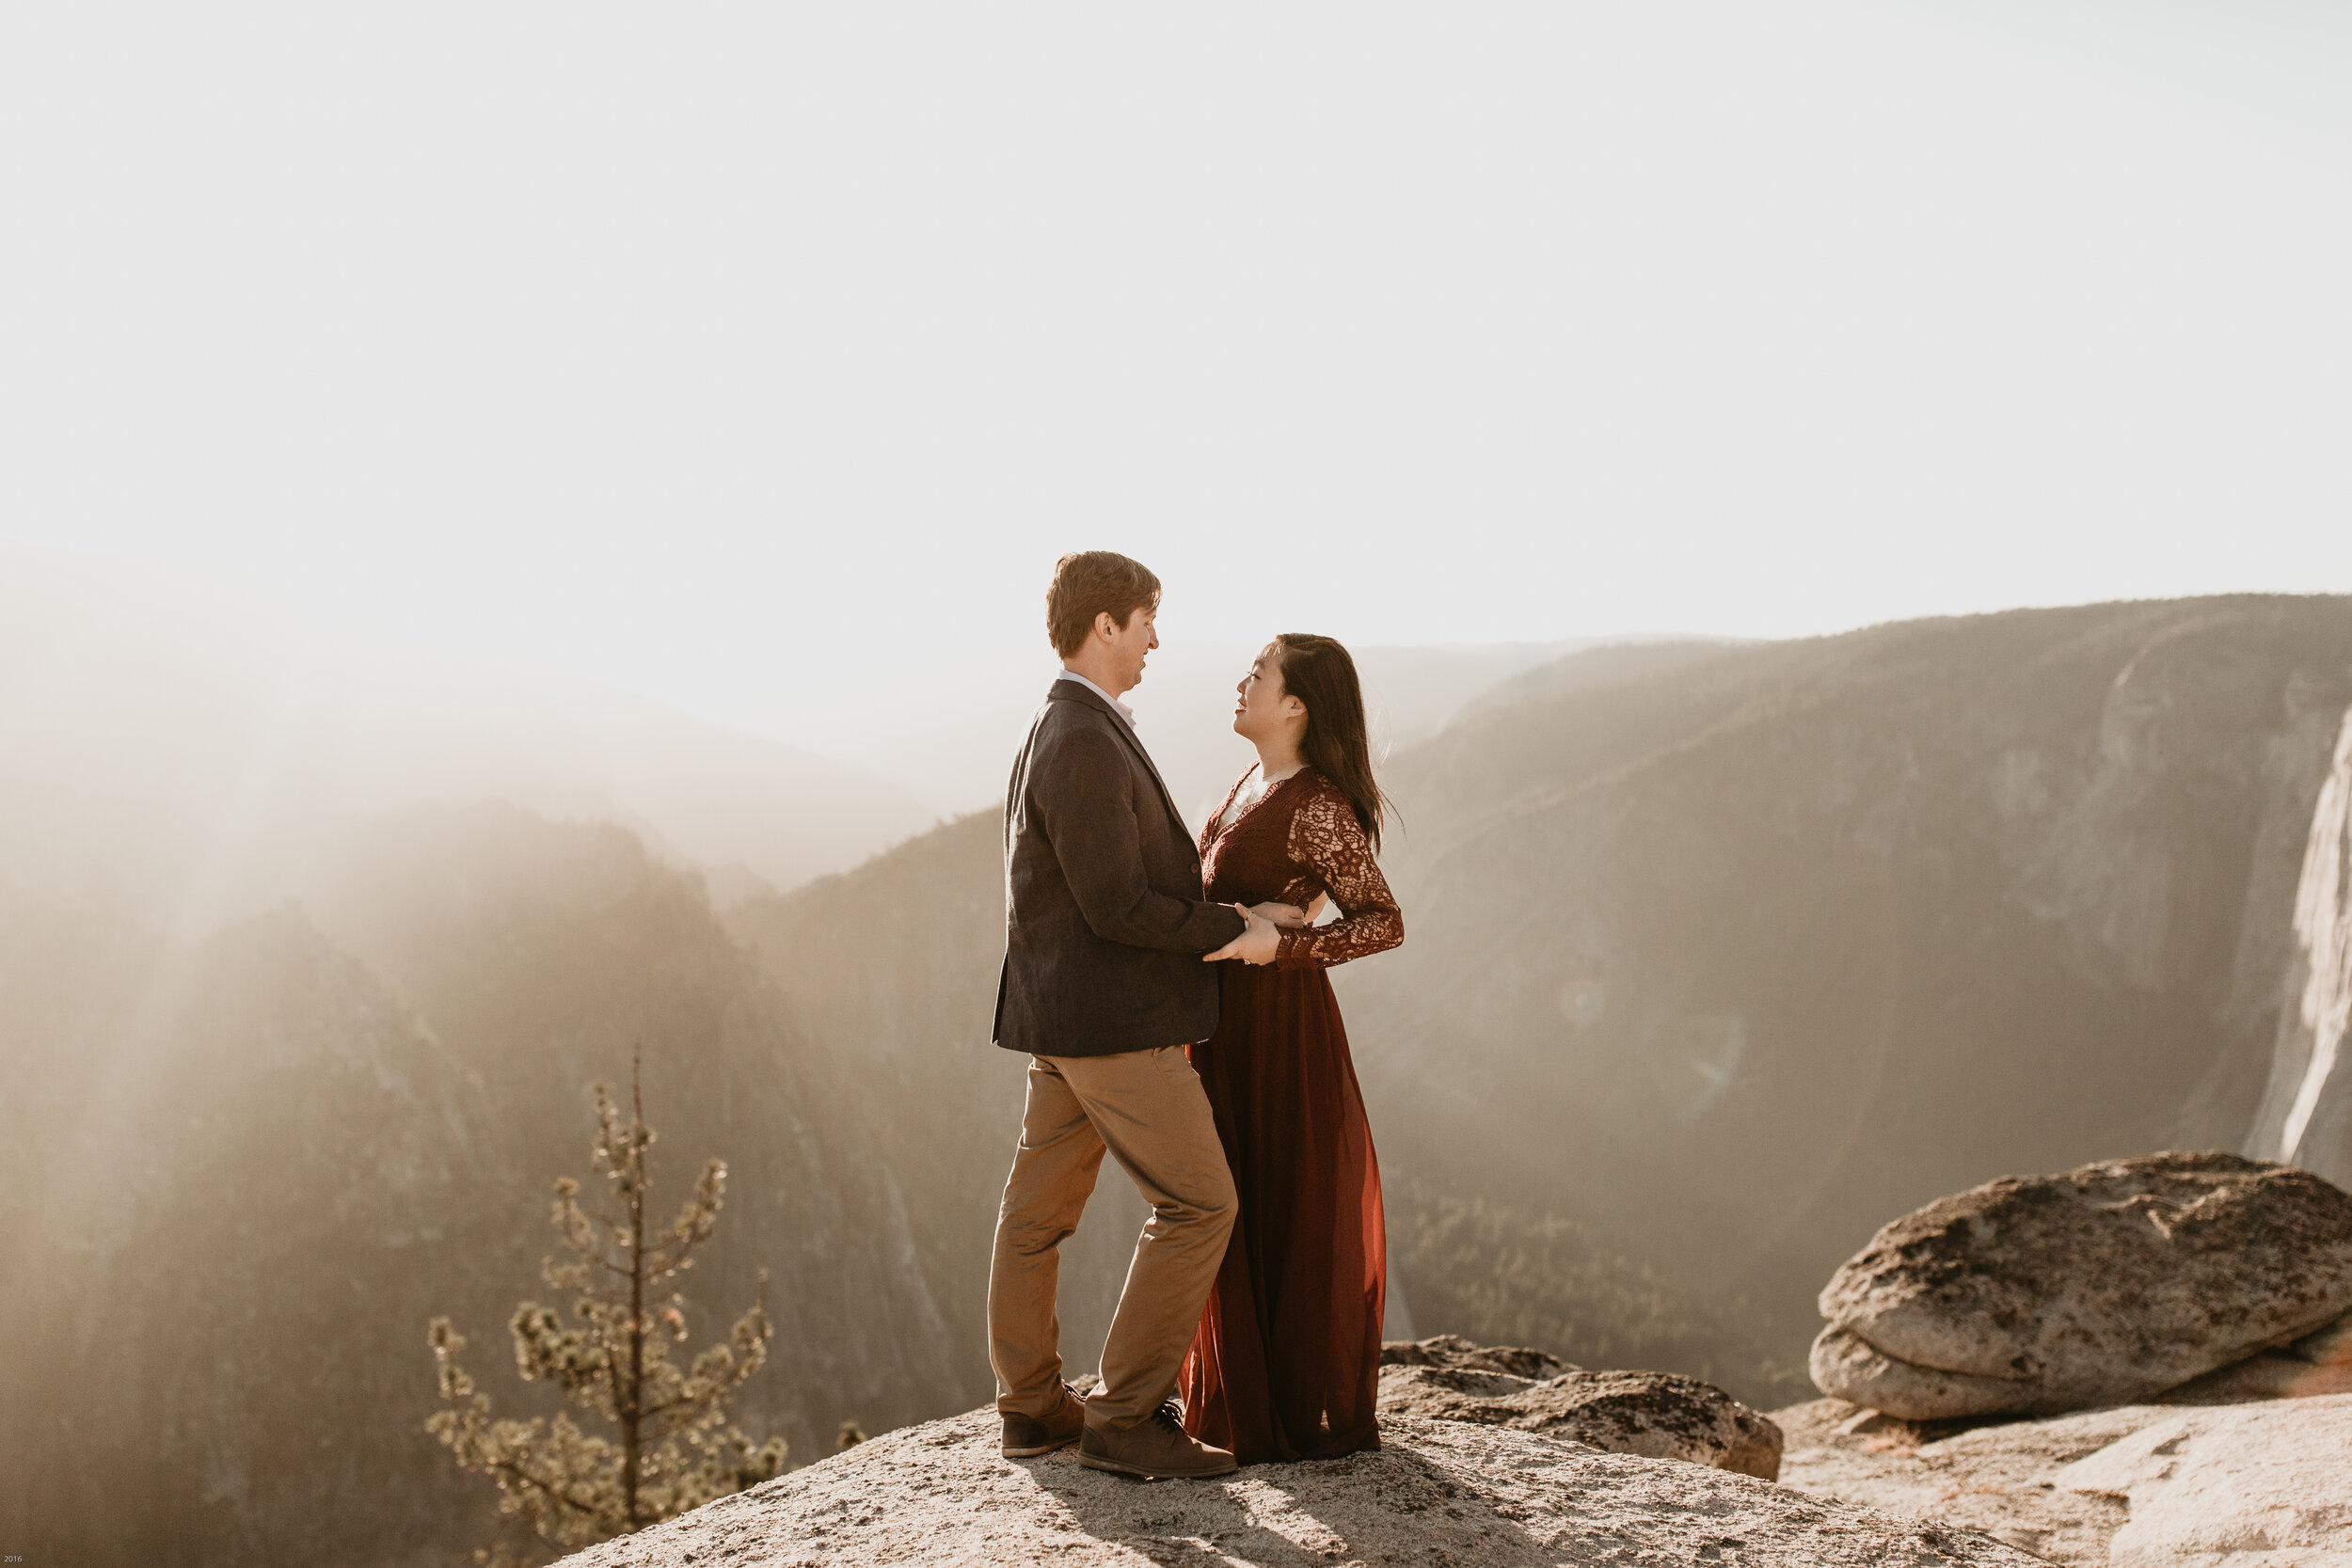 yosemite-national-park-couples-session-at-taft-point-and-yosemite-valley-yosemite-elopement-photographer-nicole-daacke-photography-134.jpg